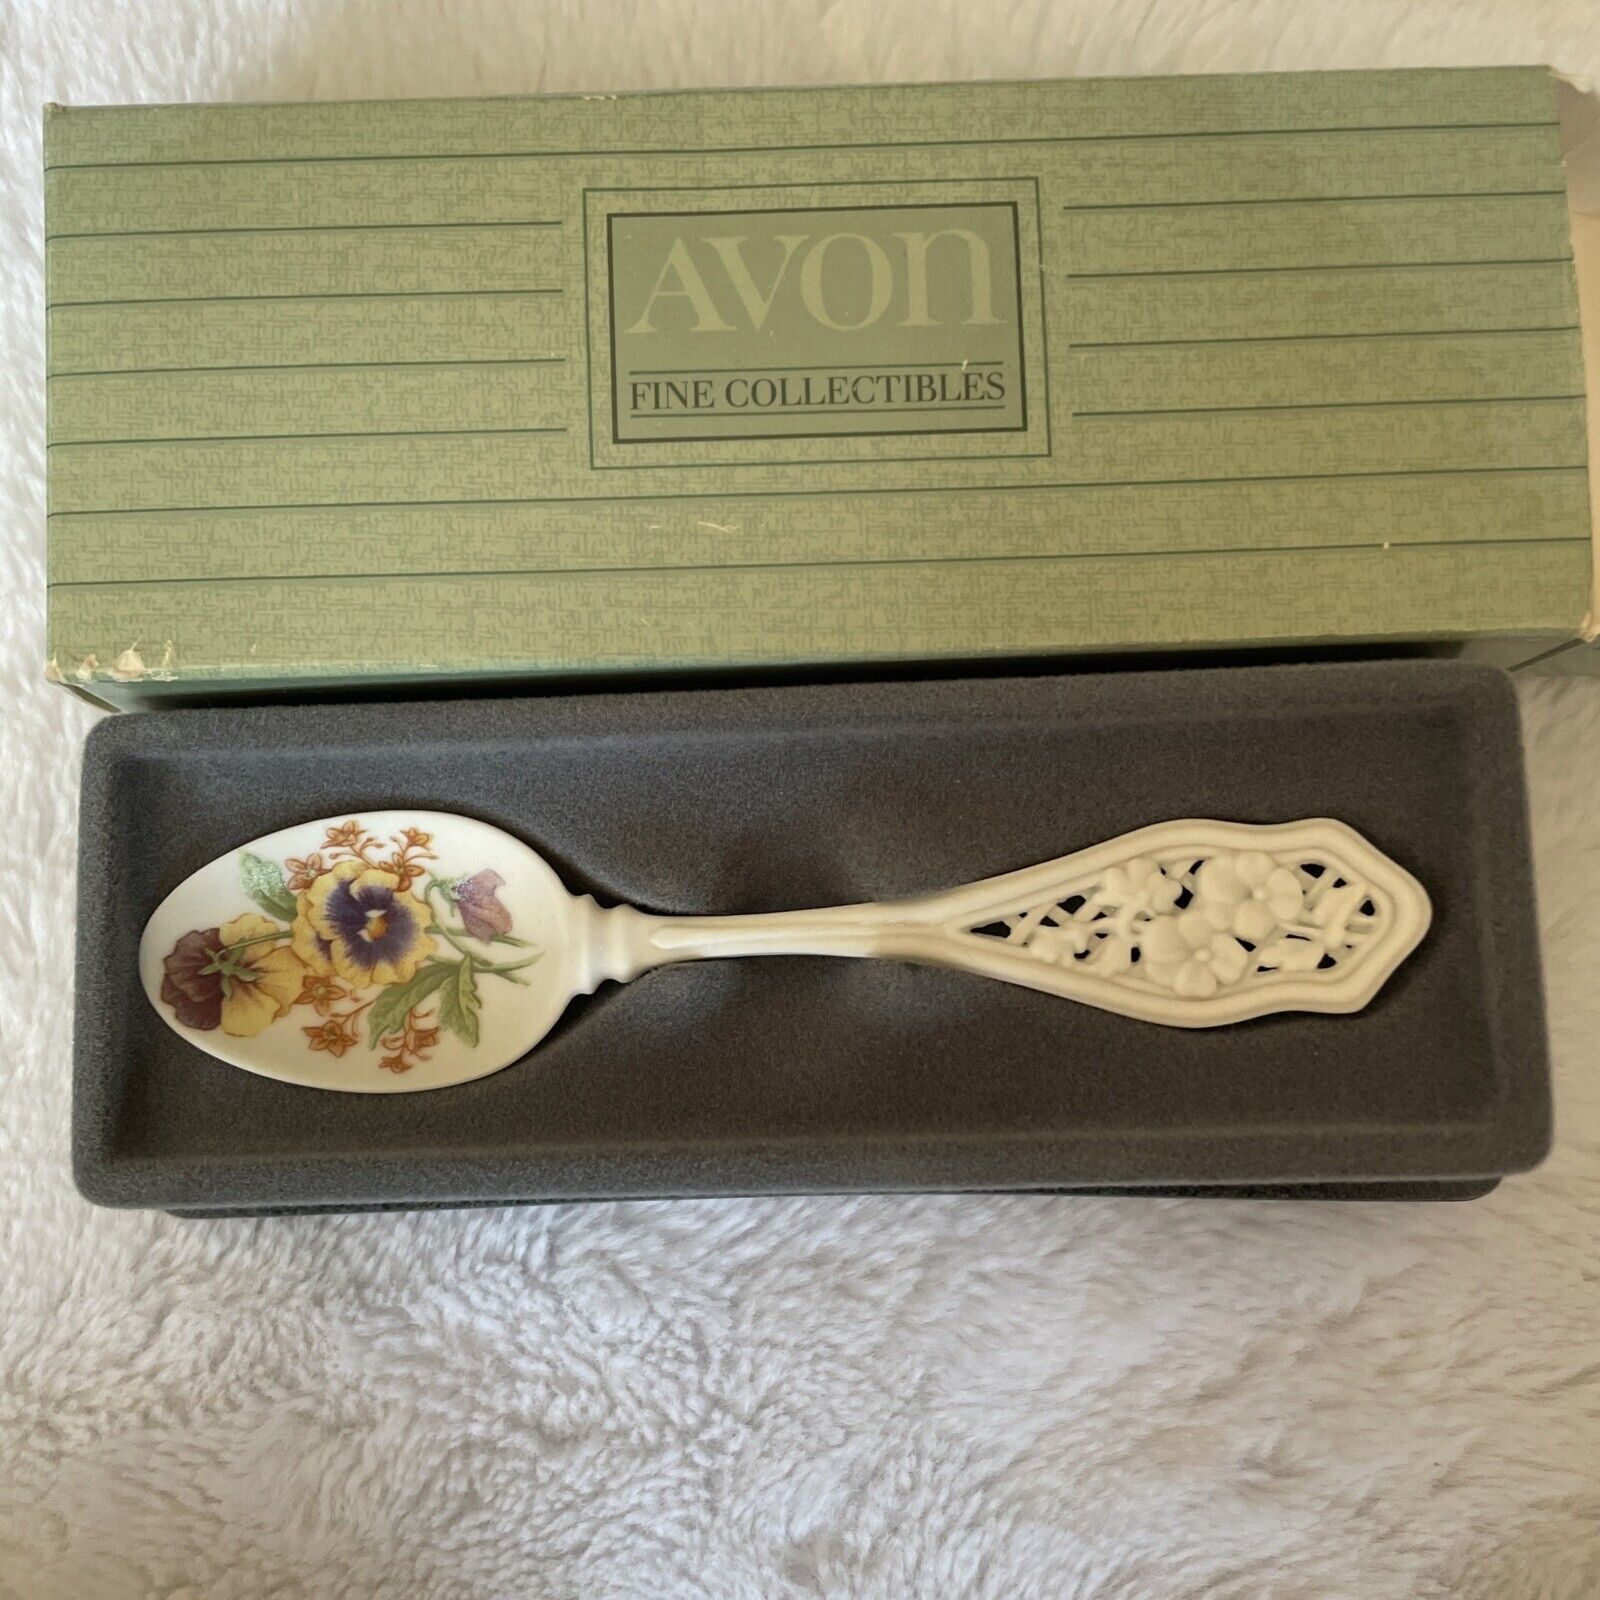 AVON American Favorites Porcelain Spoon Collection Daylily Vintage 1989 NOS 